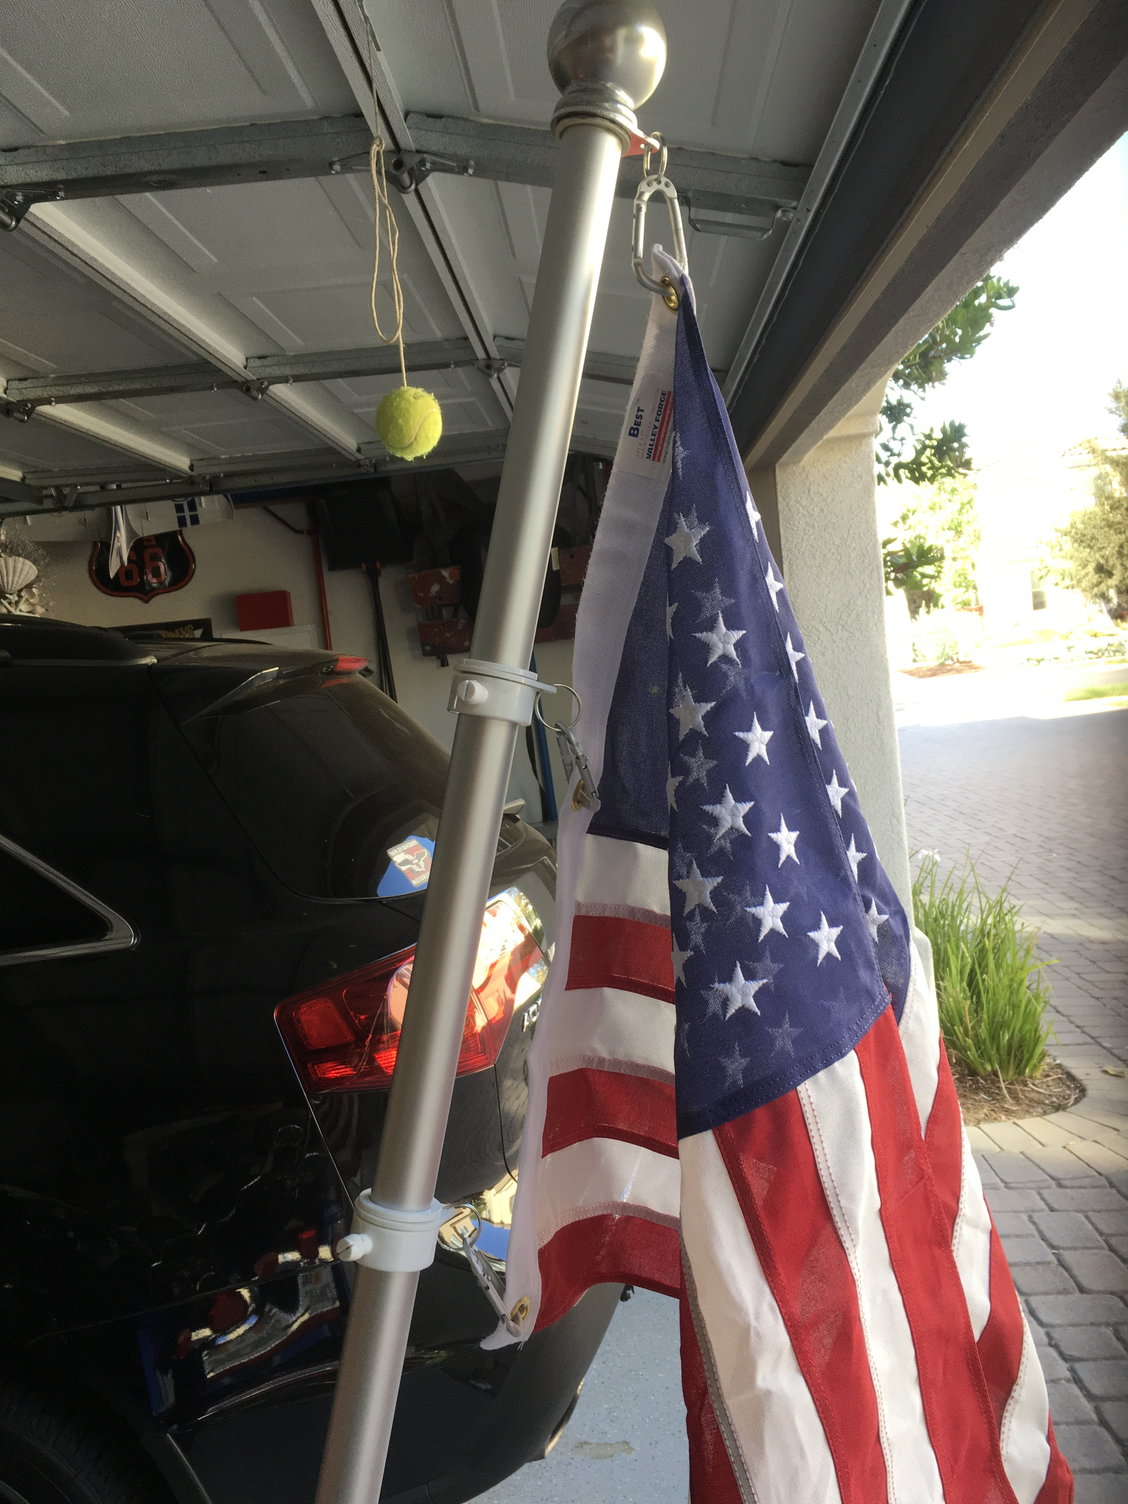 Home made parade flag holders - Page 2 - Harley Davidson Forums